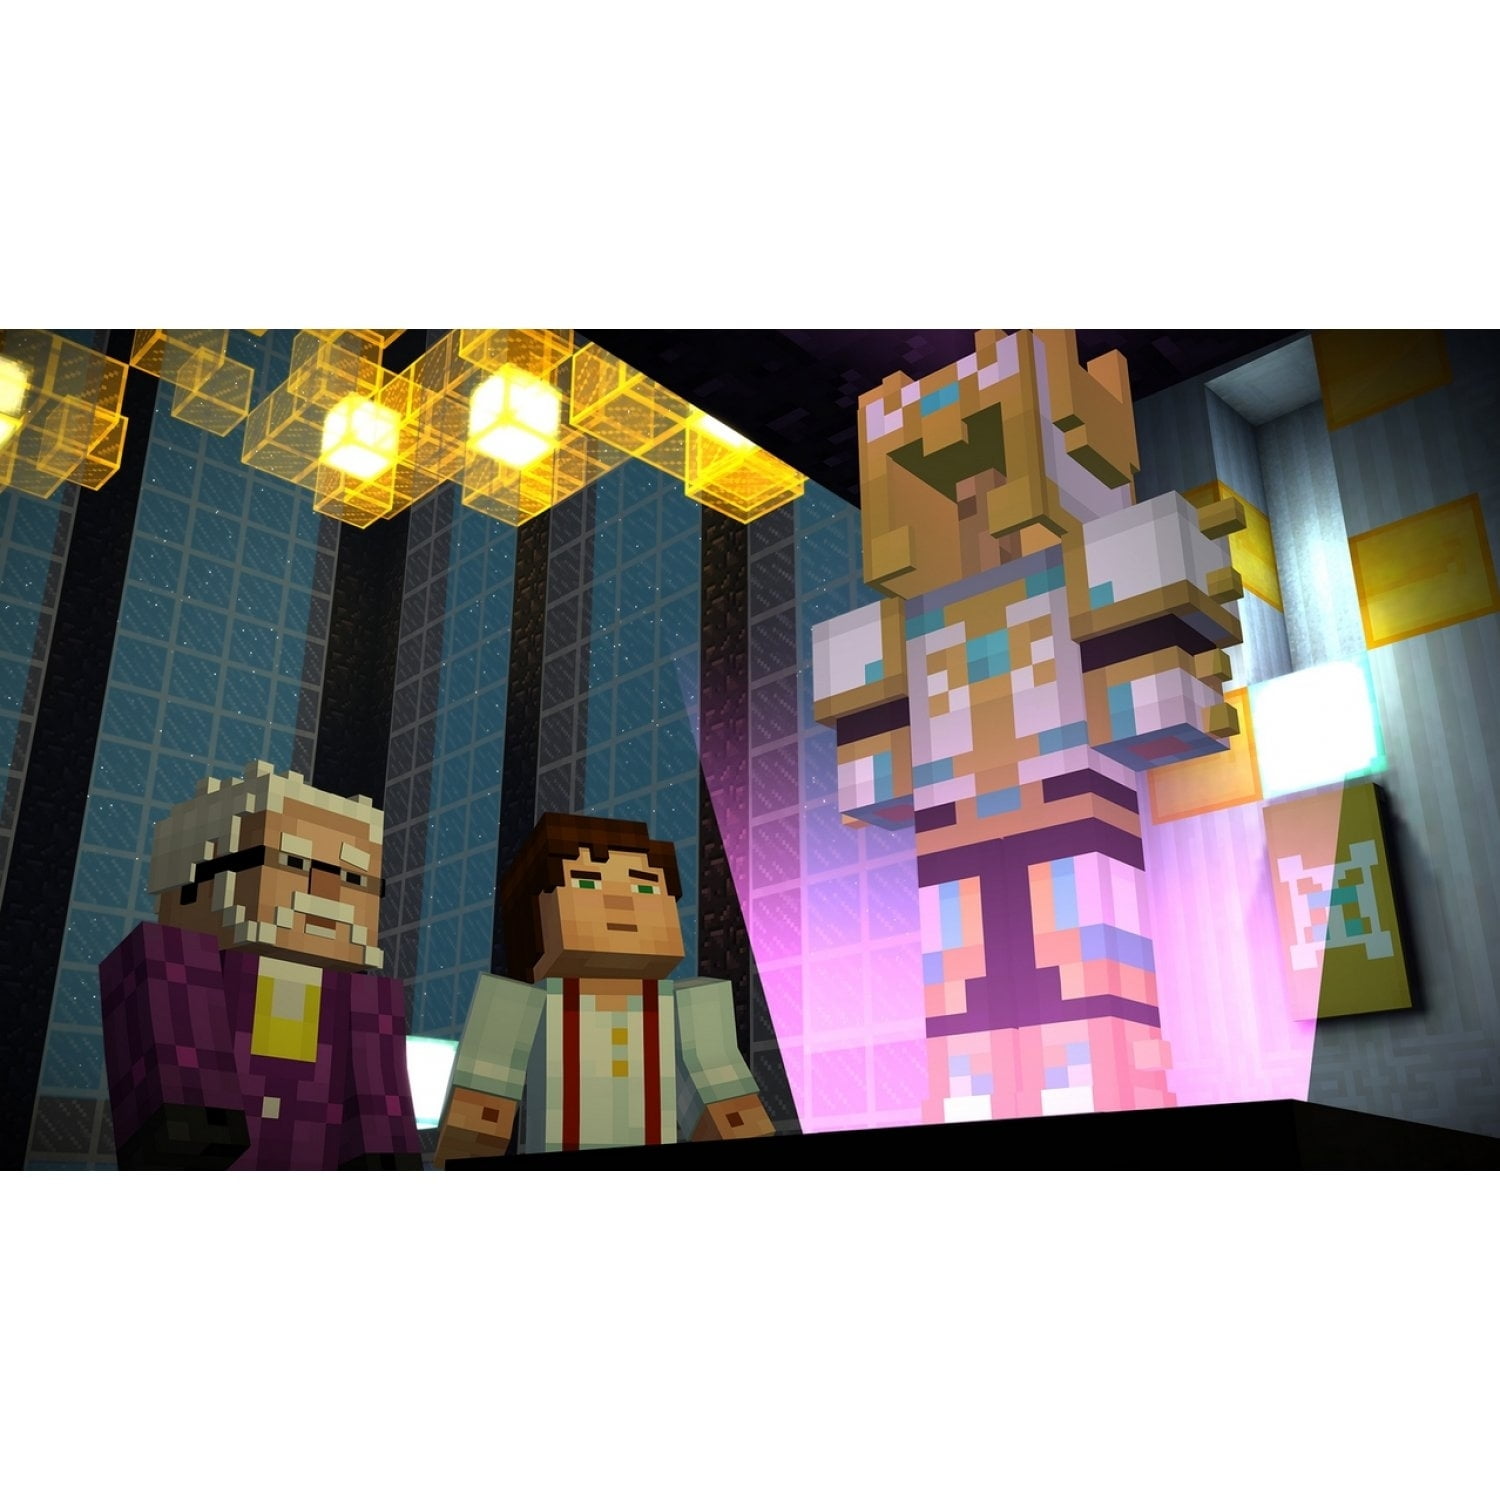  Minecraft: Story Mode- The Complete Adventure - PlayStation 4 :  Ui Entertainment: Tools & Home Improvement